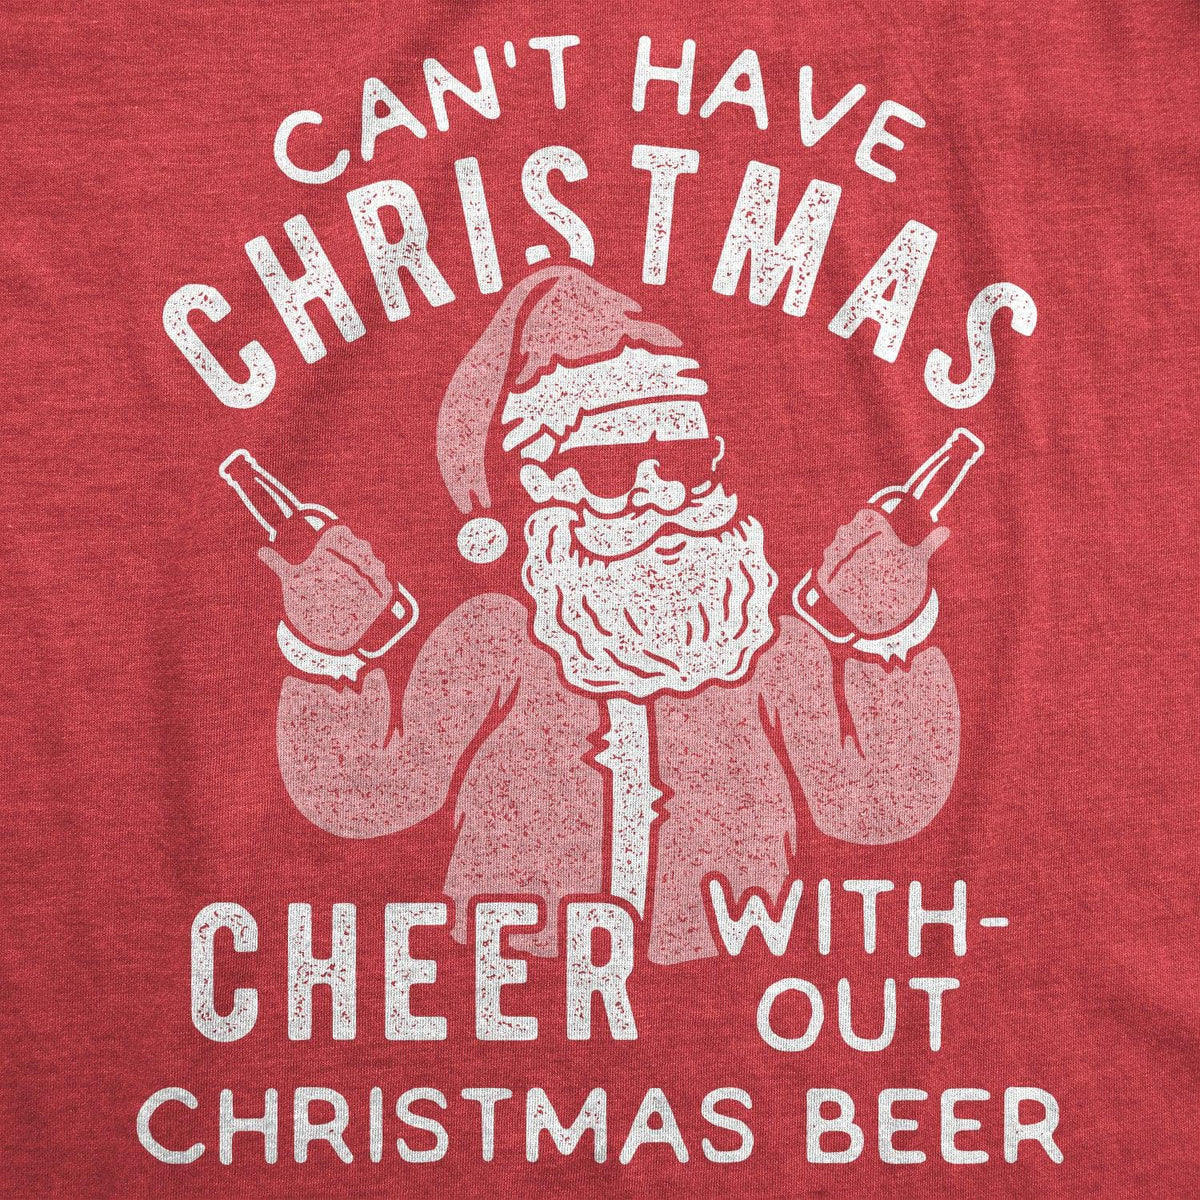 Can&#39;t Have Christmas Cheer Without Christmas Beer Women&#39;s Tshirt  -  Crazy Dog T-Shirts